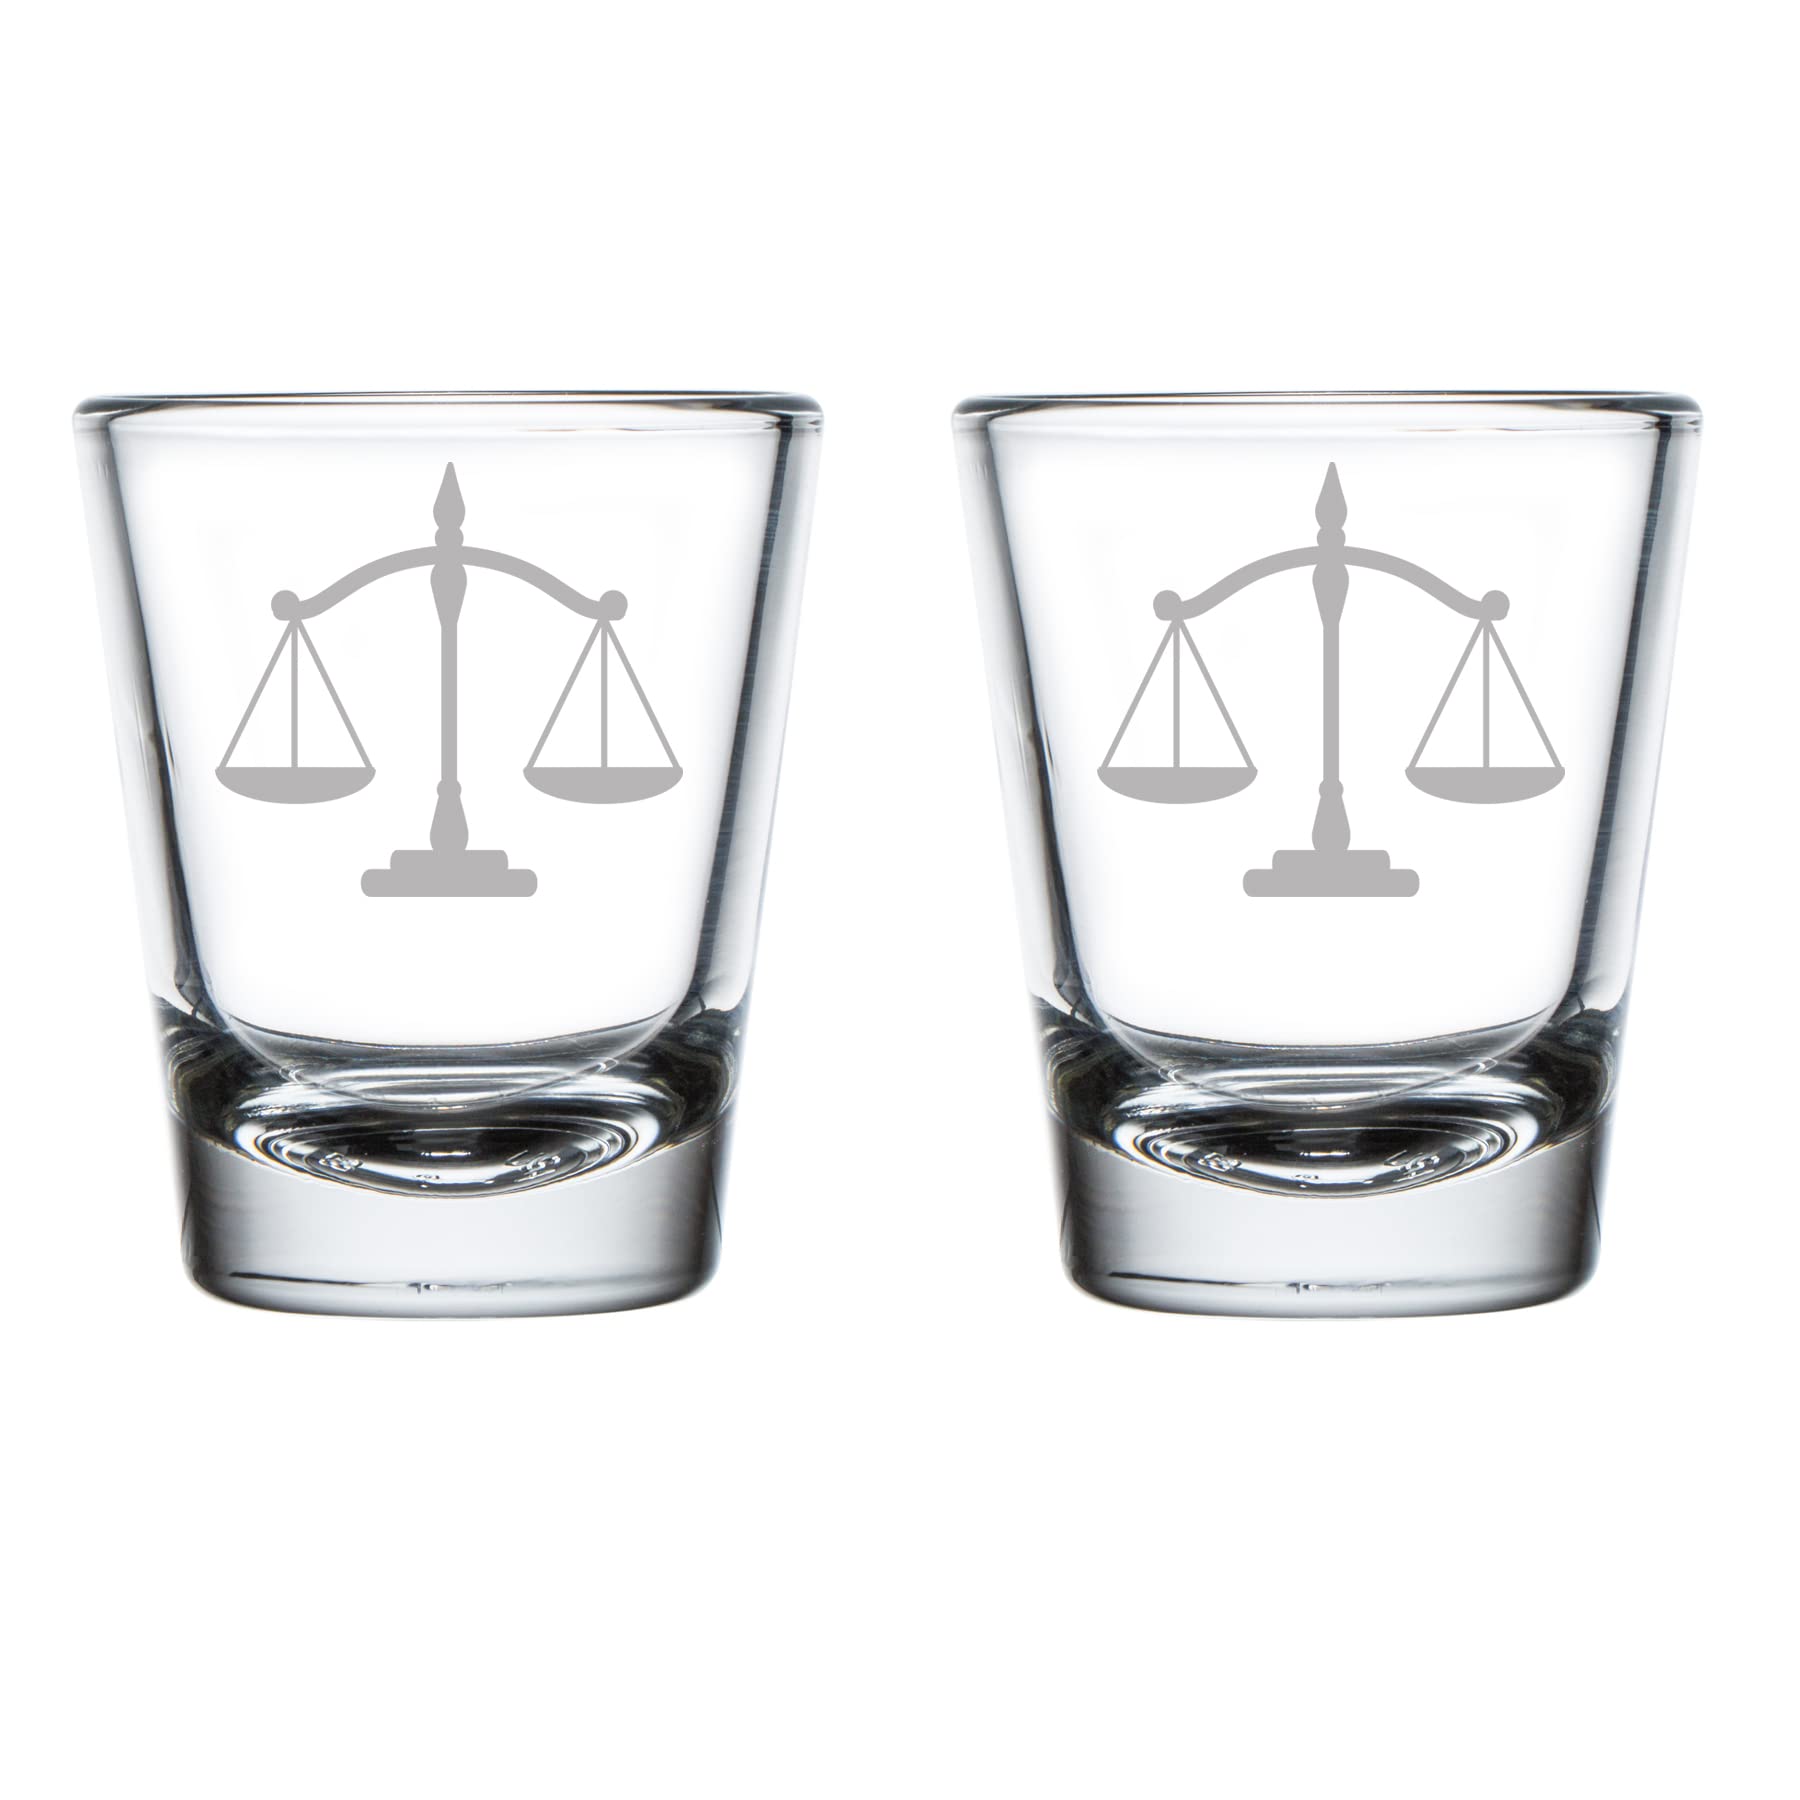 MIP Brand Set of 2 Shot Glasses 1.75oz Shot Glass Scales of Justice Lawyer Paralegal Judge